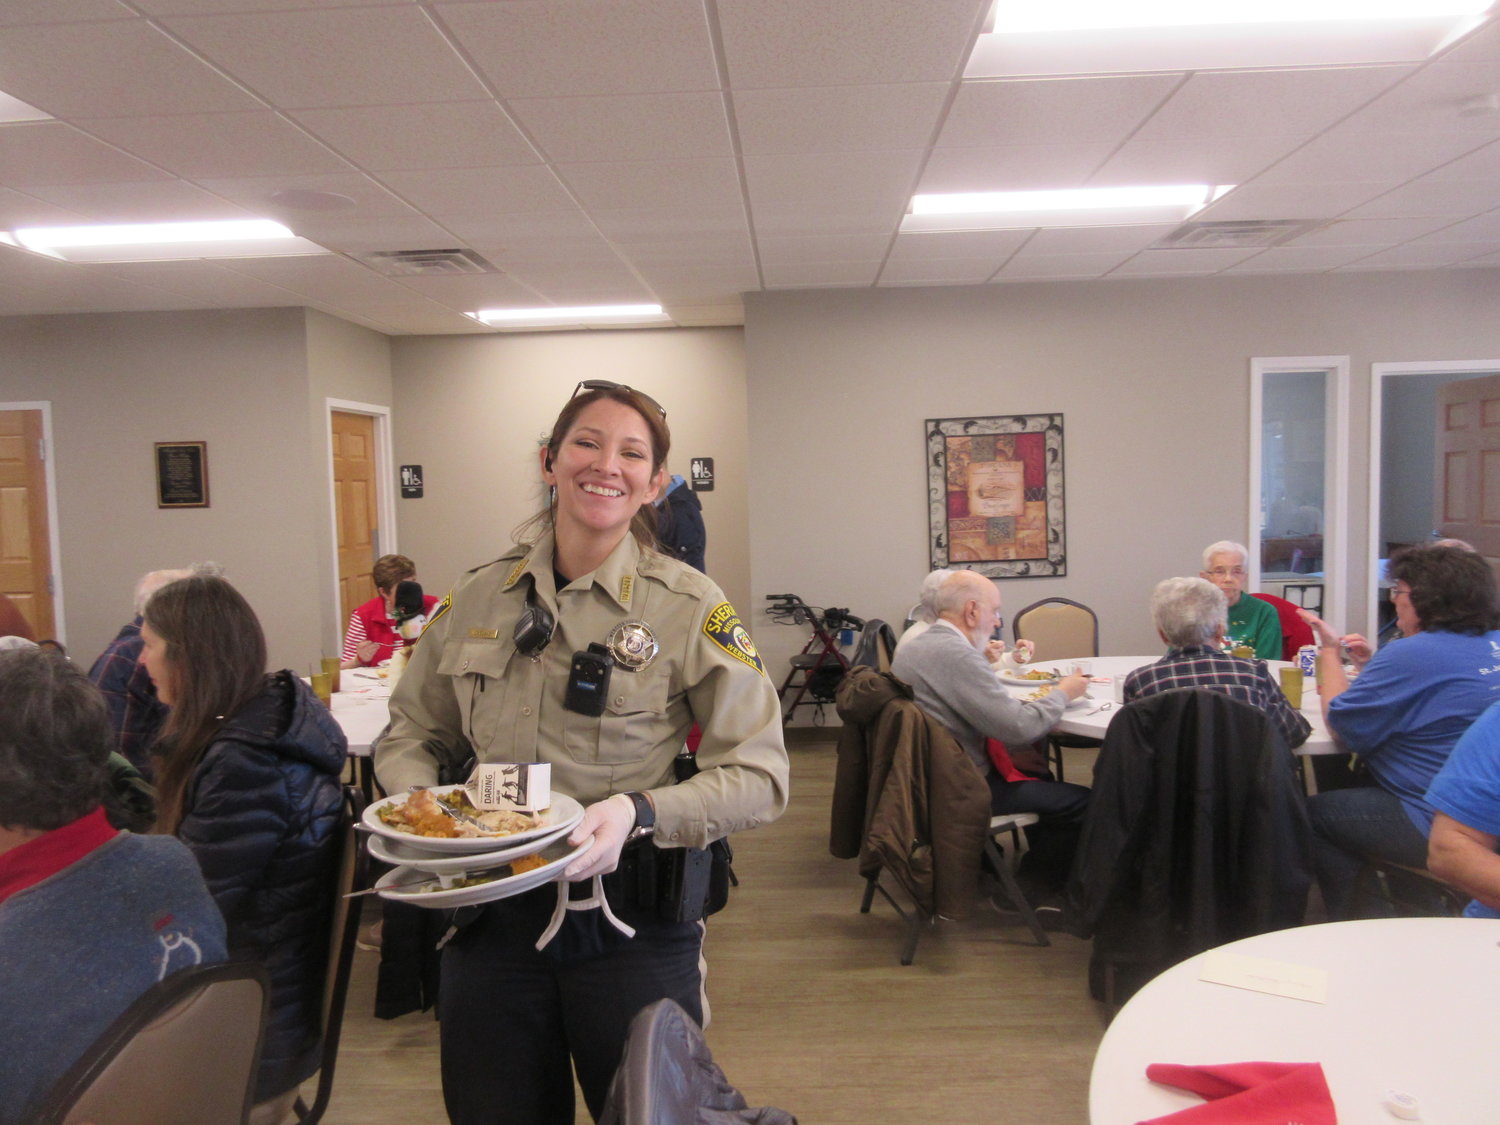 Deputy Chelsea Loveland shares a smile as she shows the true meaning of service at the Marshfield Senior Center.